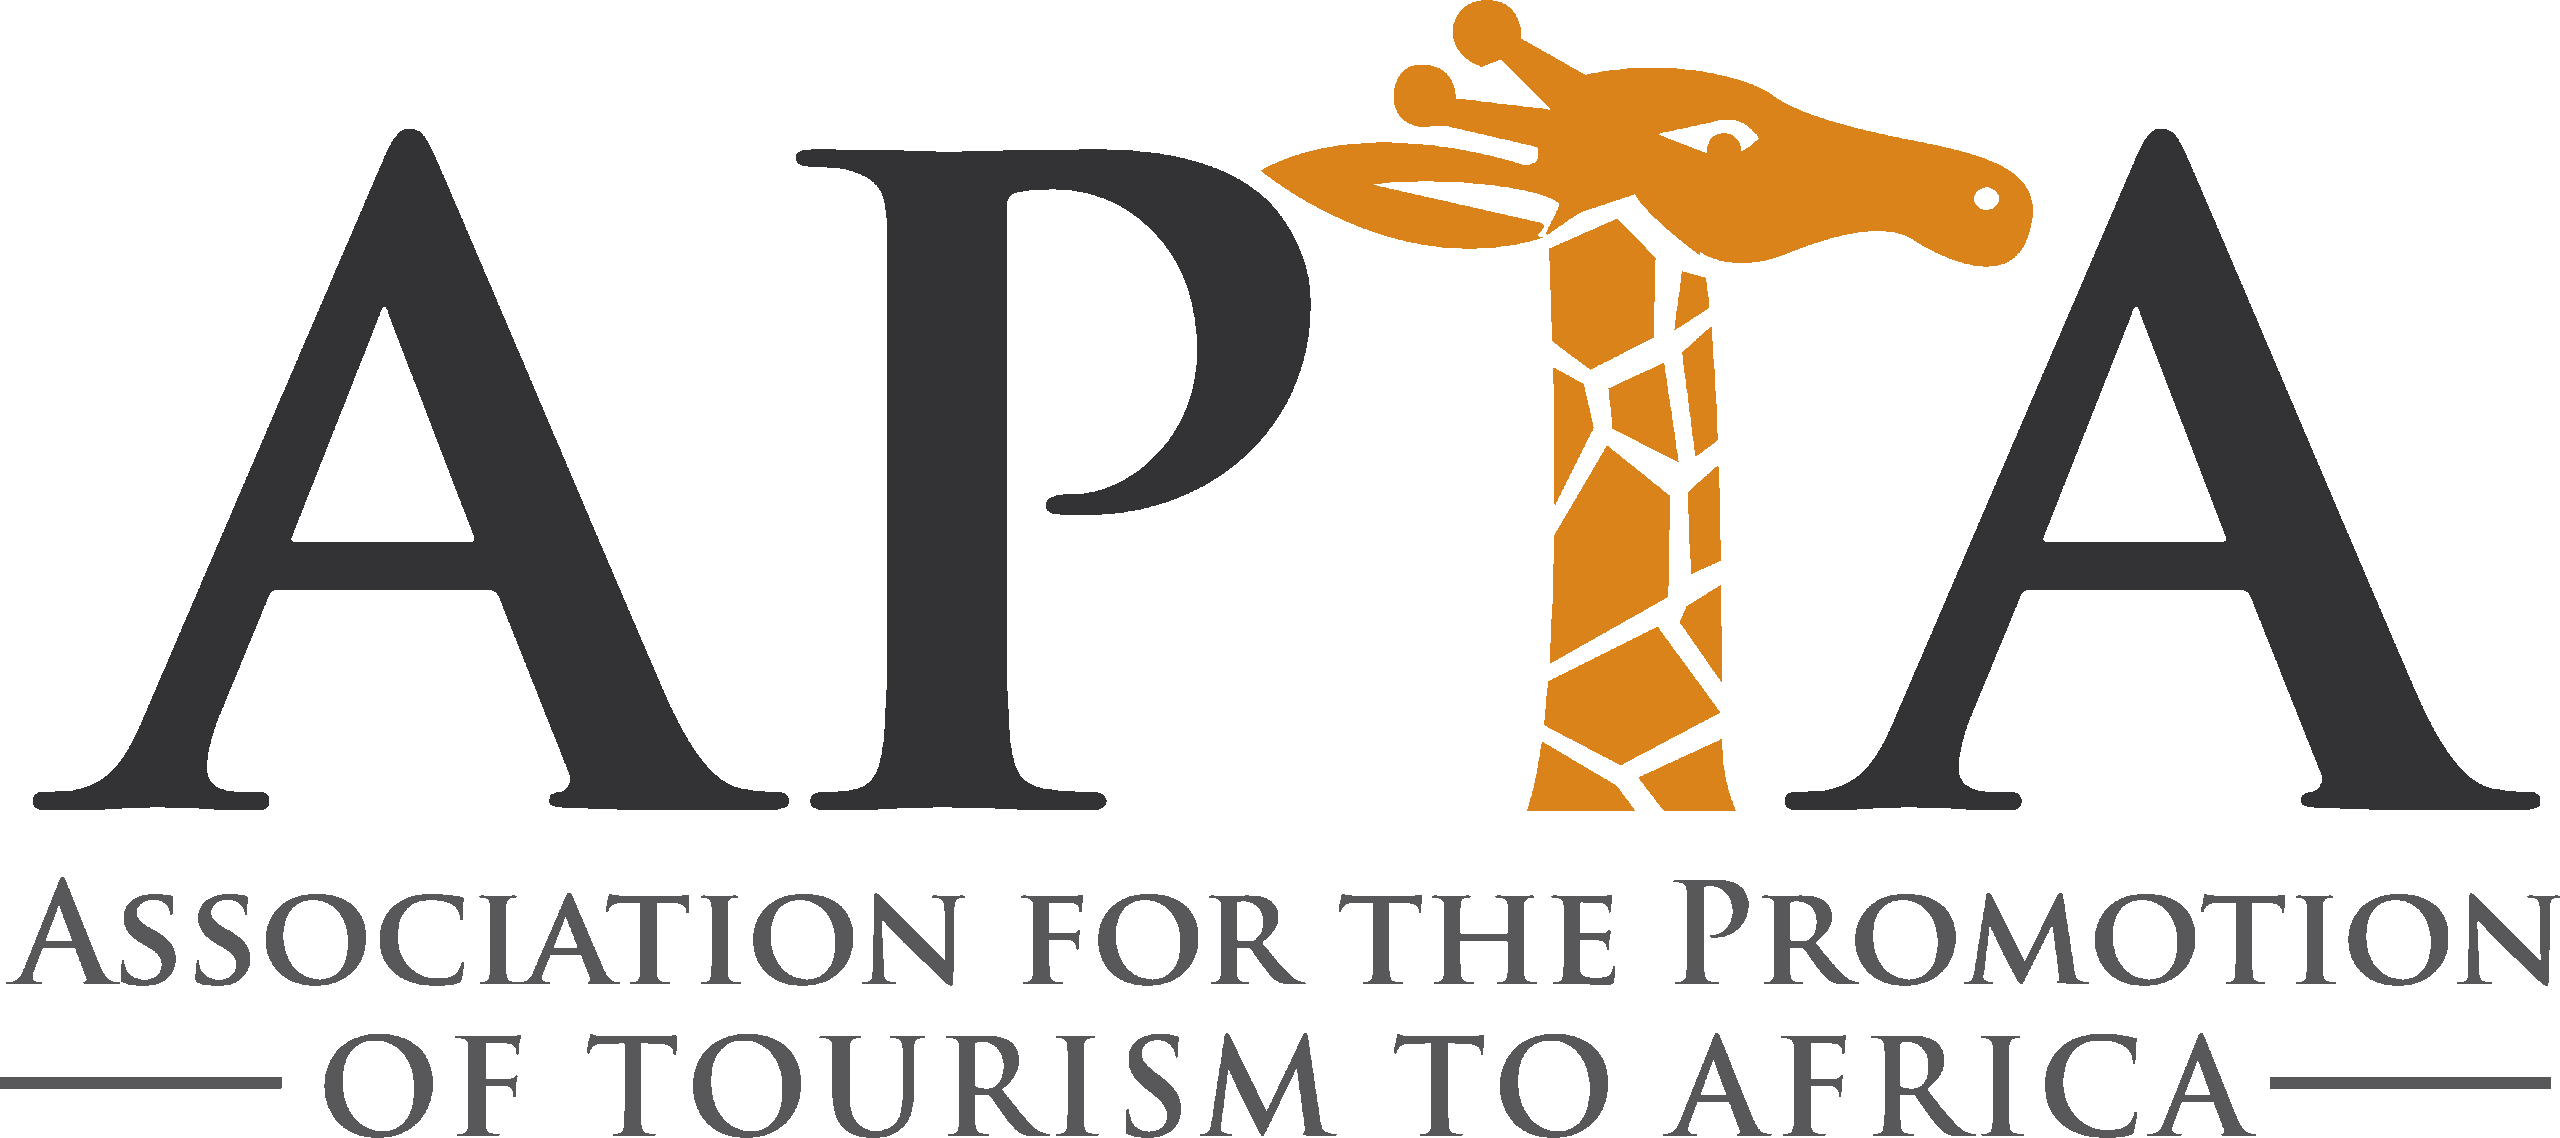 APTA logo - Association for the Promotion of Tourism to Africa. Driving tourism growth and showcasing the diverse wonders of Africa. Visit our website to explore unforgettable destinations, cultural experiences, and breathtaking landscapes. Plan your African adventure today and immerse yourself in the beauty and richness of the continent. #APTA #TourismToAfrica #DiscoverAfrica"